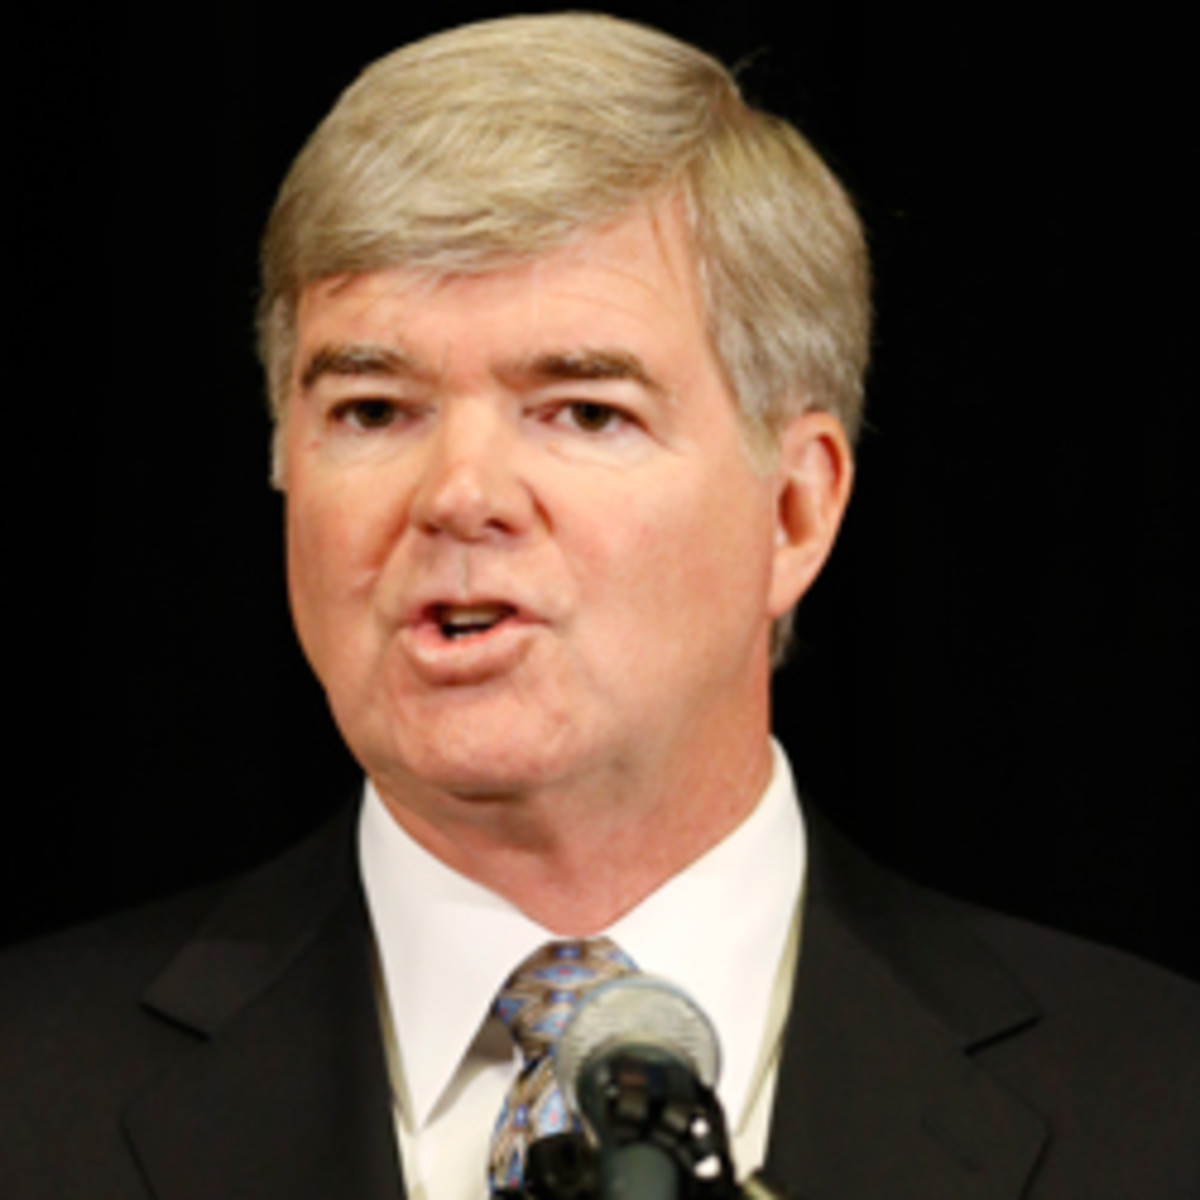 Several coaches have been critical of NCAA President Mark Emmert's handling of looser restrictions for contacting recruits. (Joe Robbins/Getty Images)